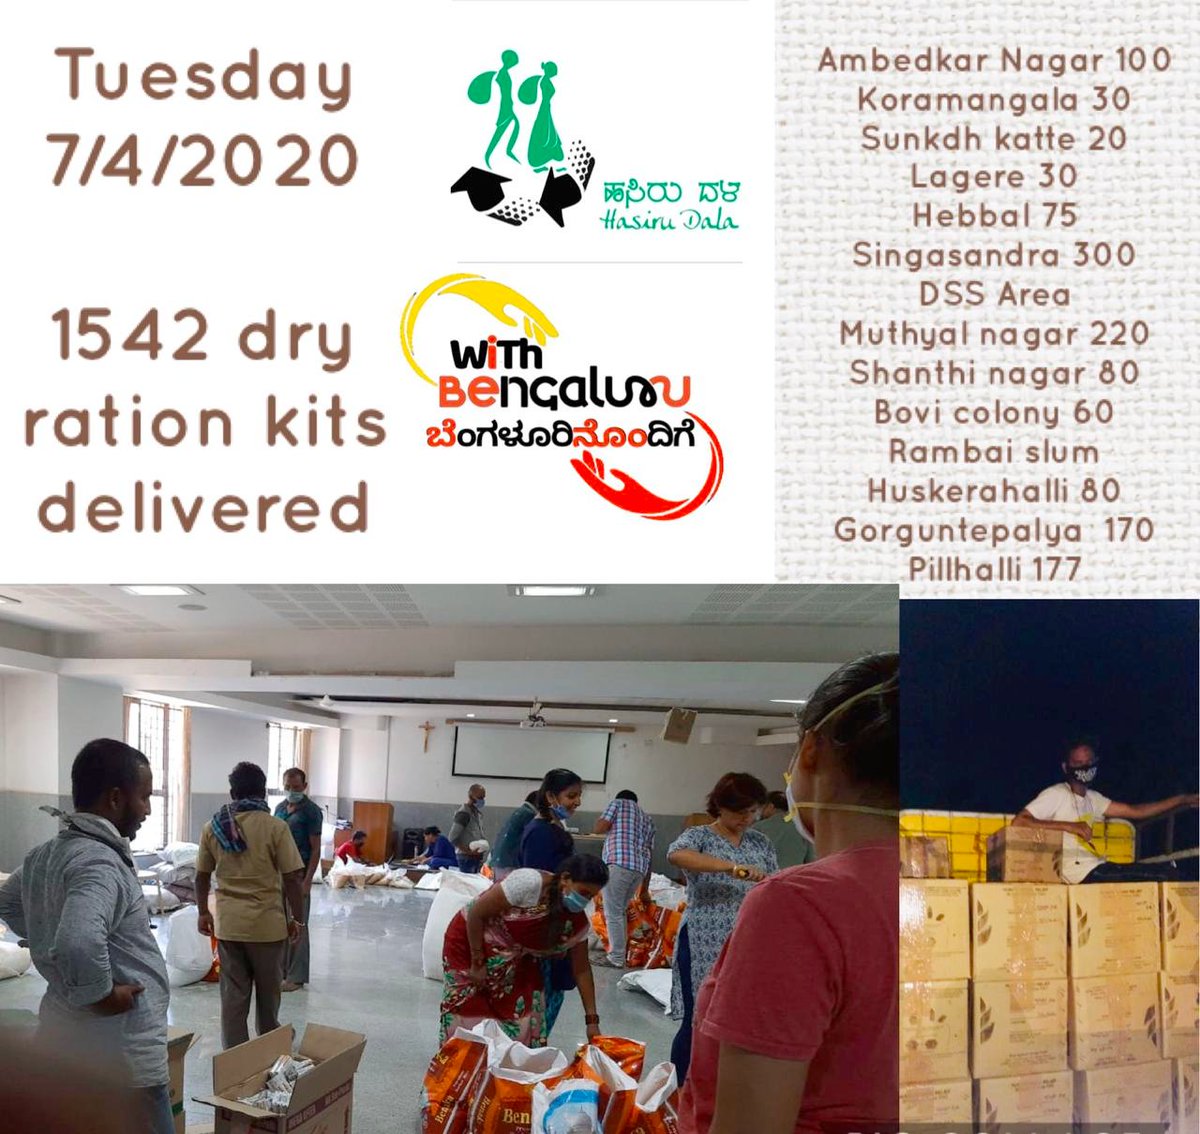 Till date, the WithBengaluru initiative distributed ~6500 food ration kits to vulnerable groups across  #Bengaluru. Thoughts about the 2-week journey...